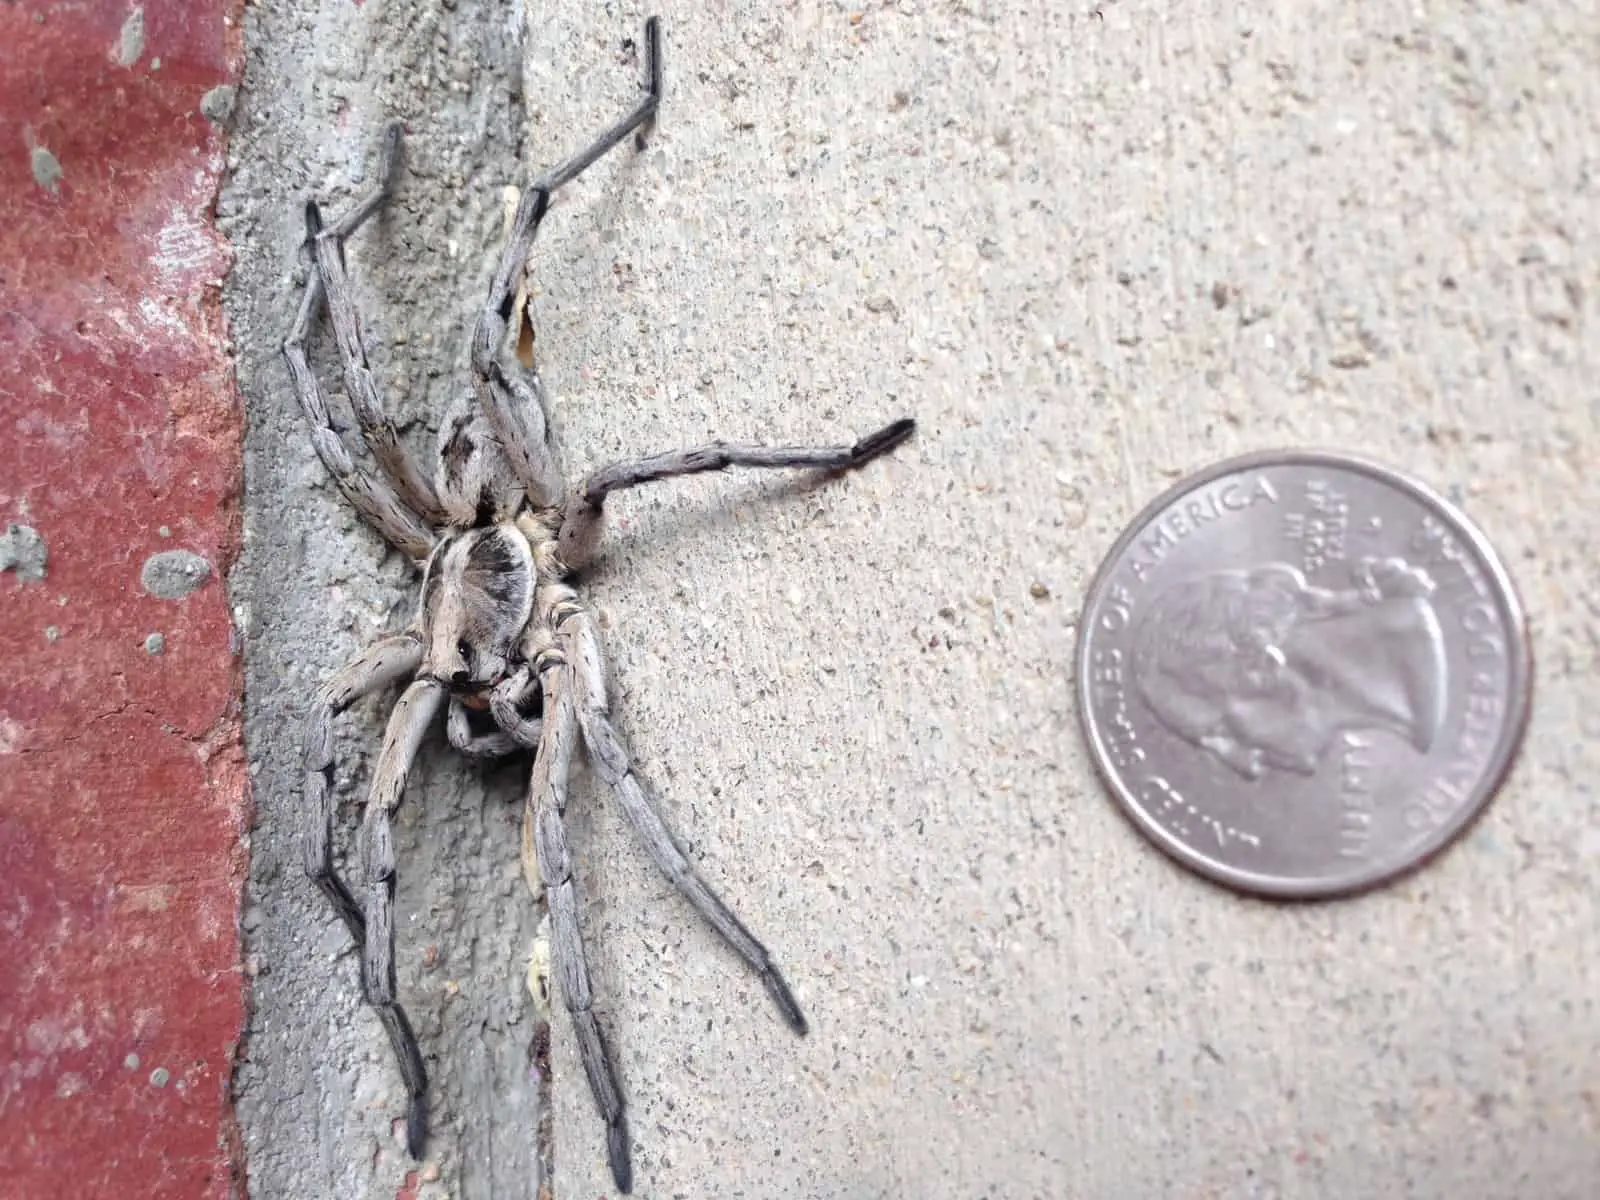 Carolina Wolf Spider size comparison with coin